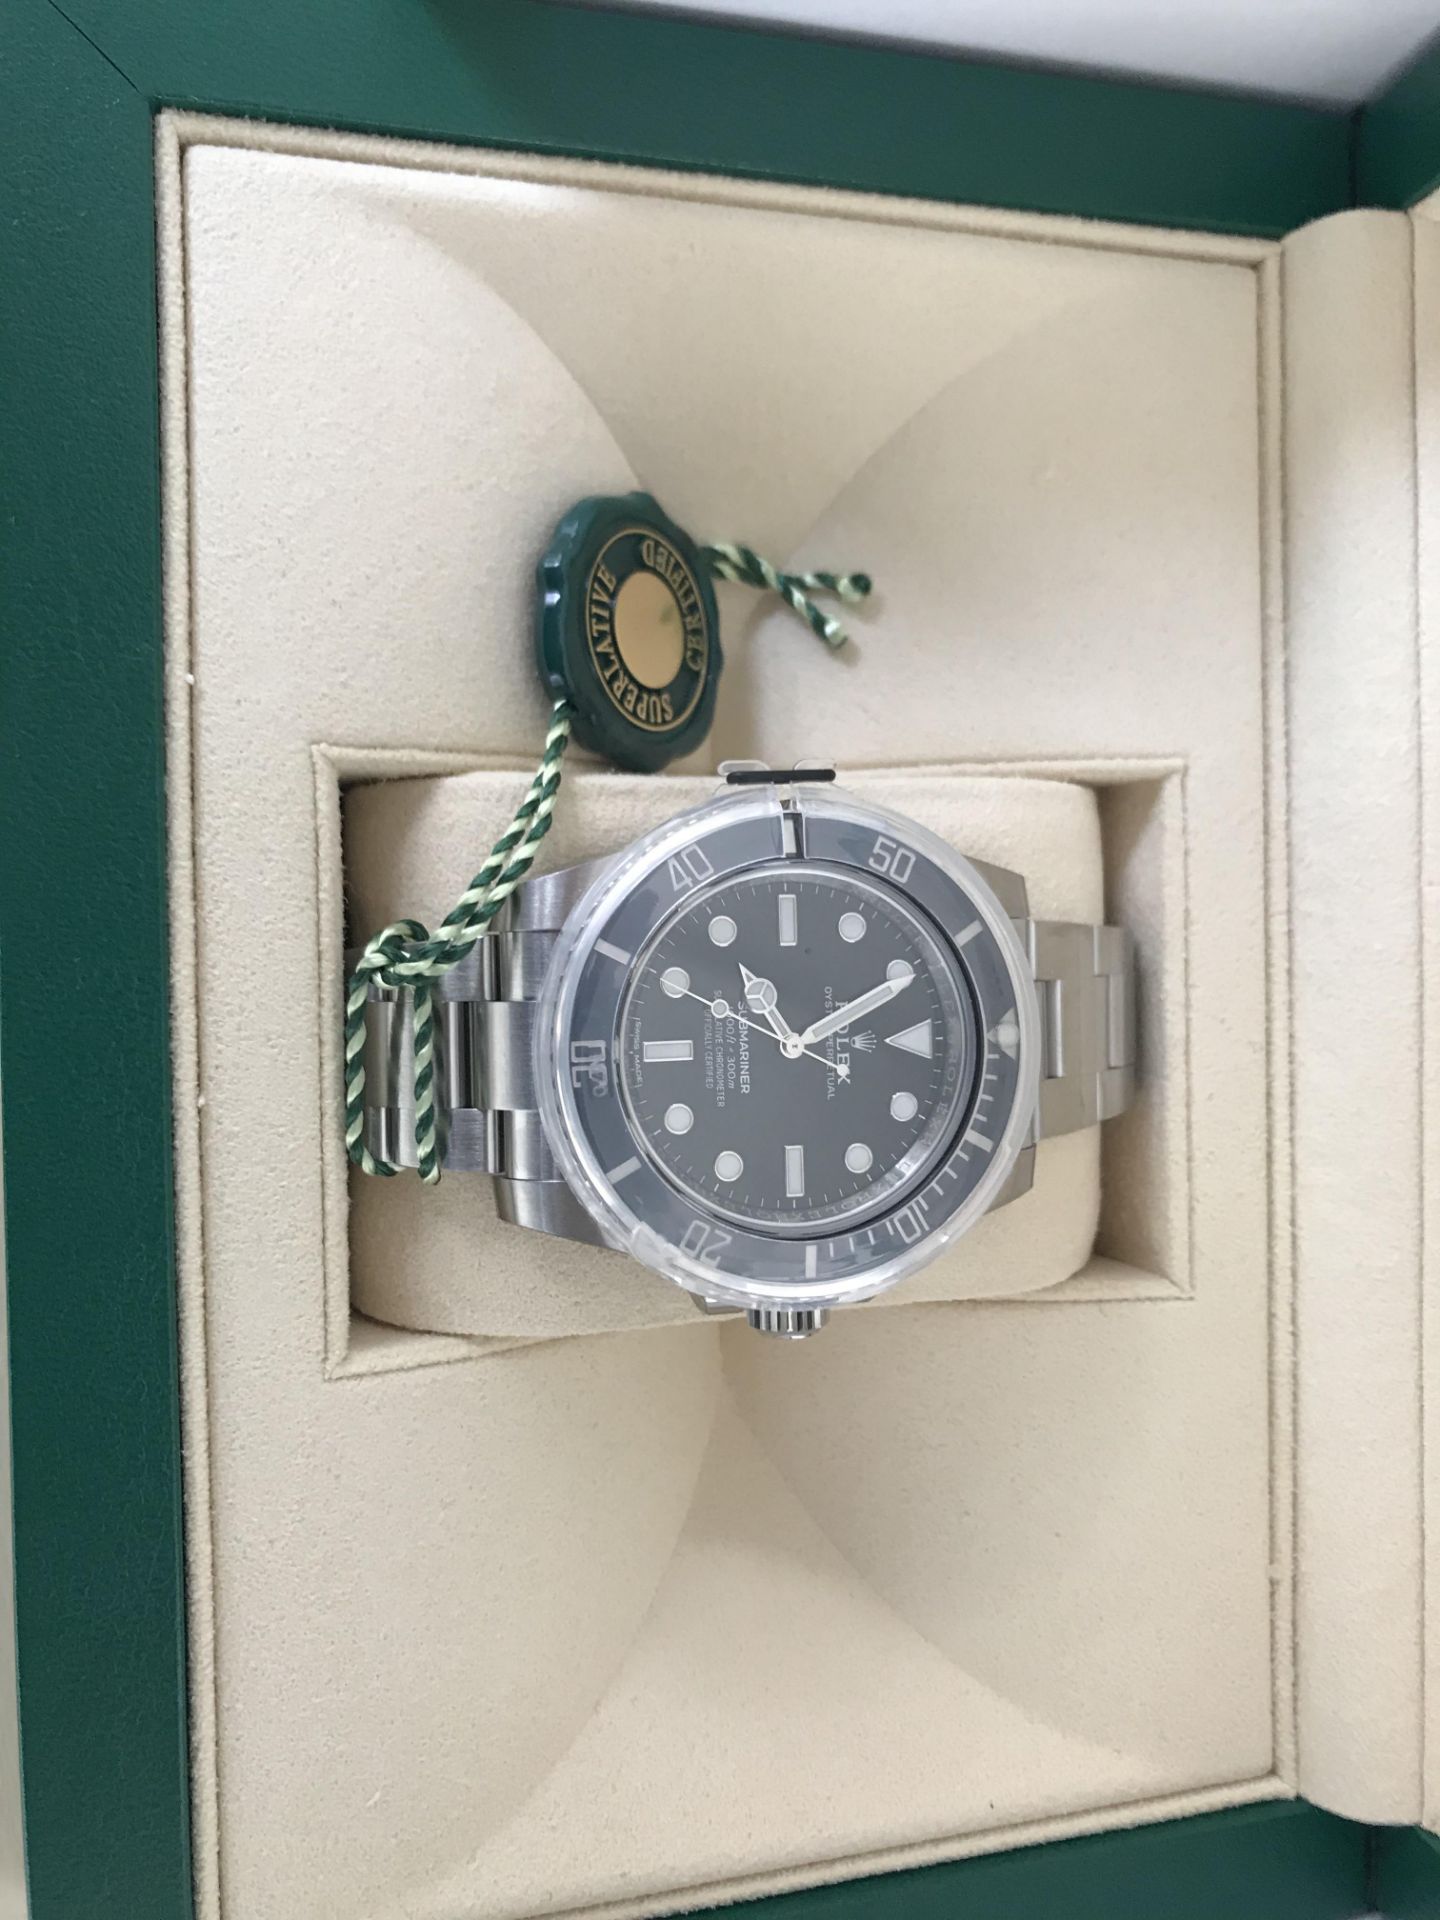 2020 ROLEX SUBMARINER OYSTER STEEL 40 MM WATCH 114060 - Image 8 of 15